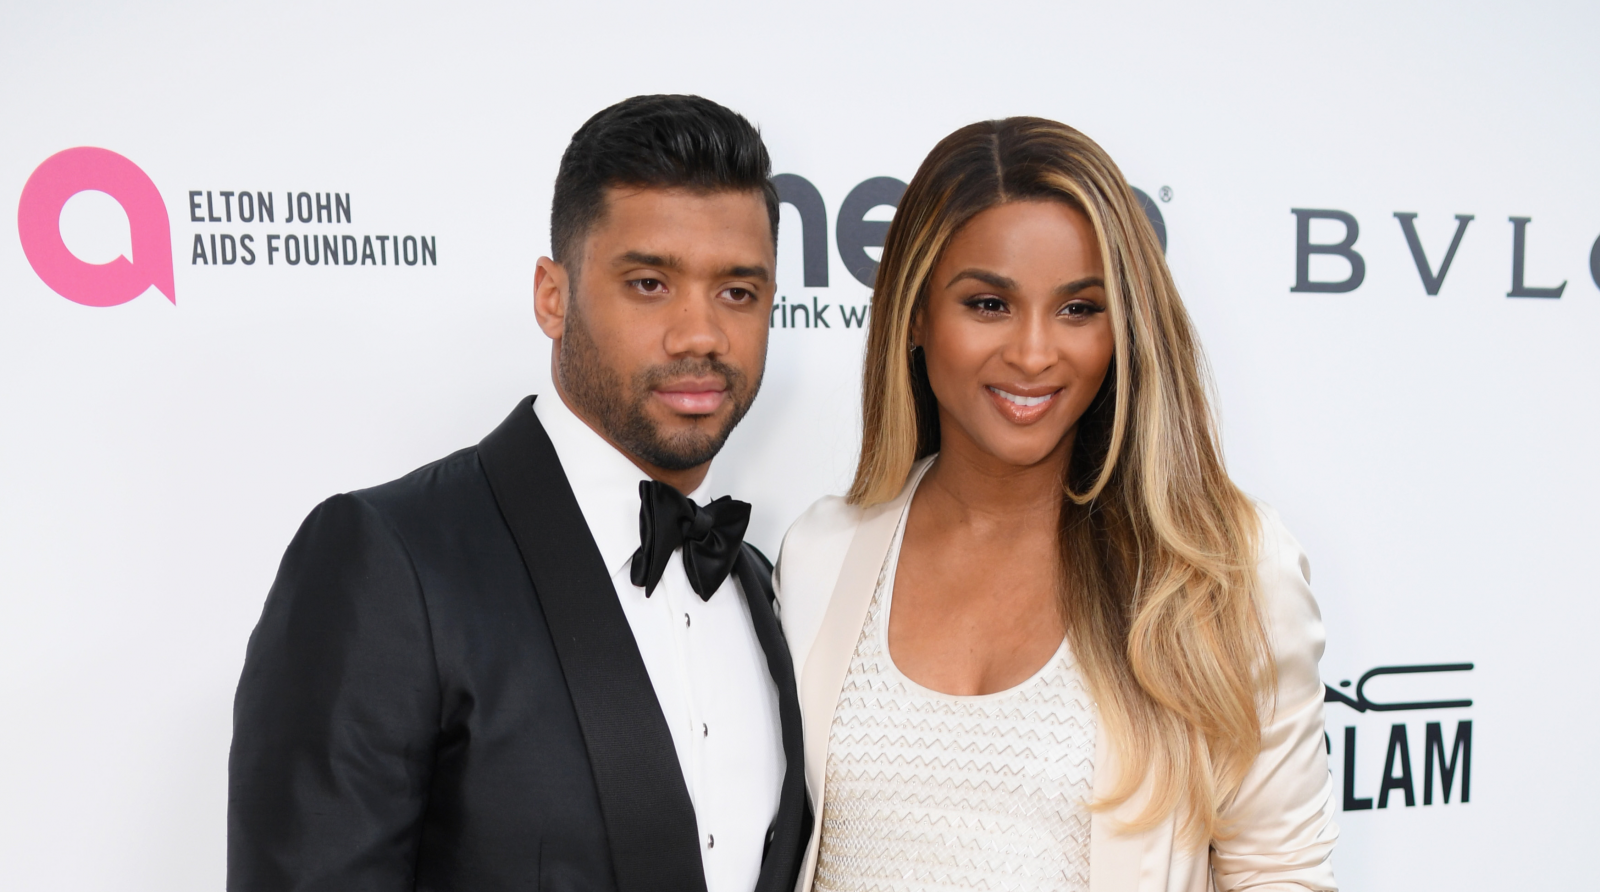 Ciara dons plunging top in first glamorous date night with husband